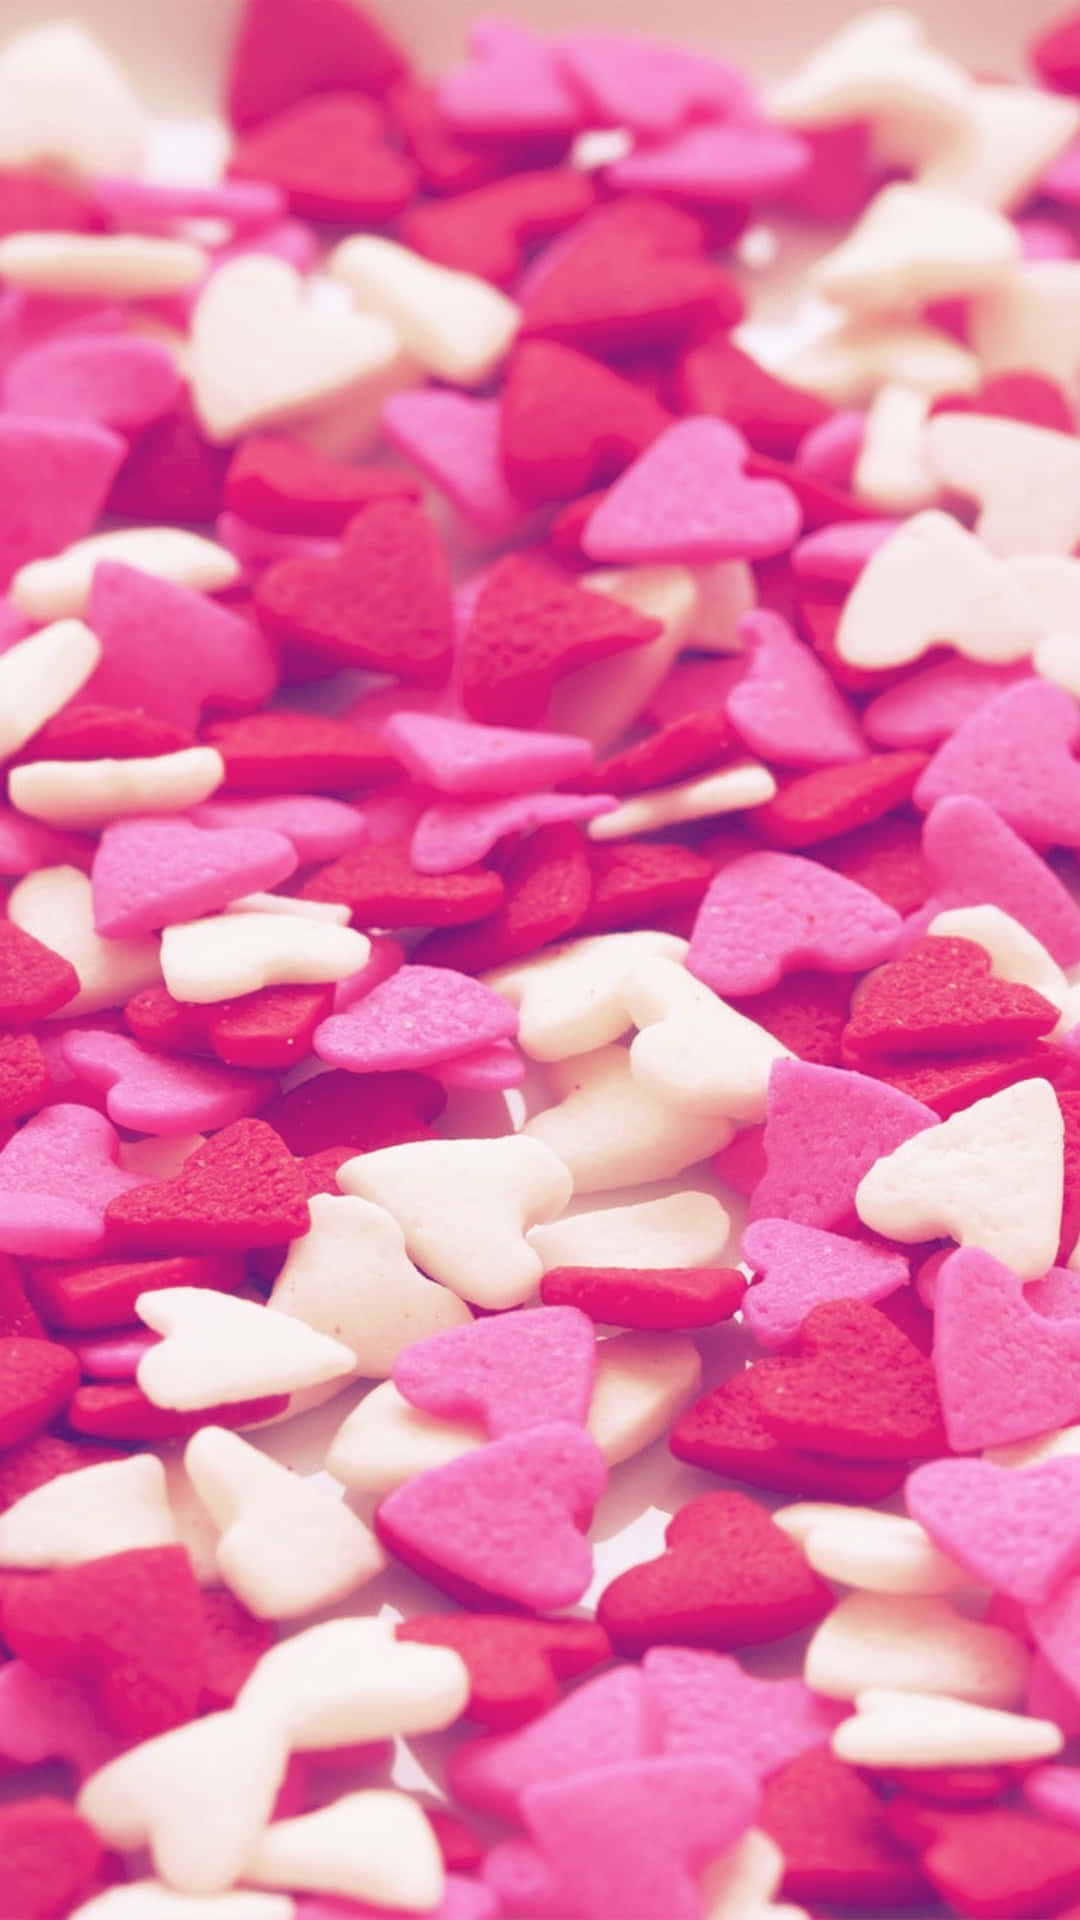 Sweet Candies Pink Heart Shapes Iphone Wallpaper